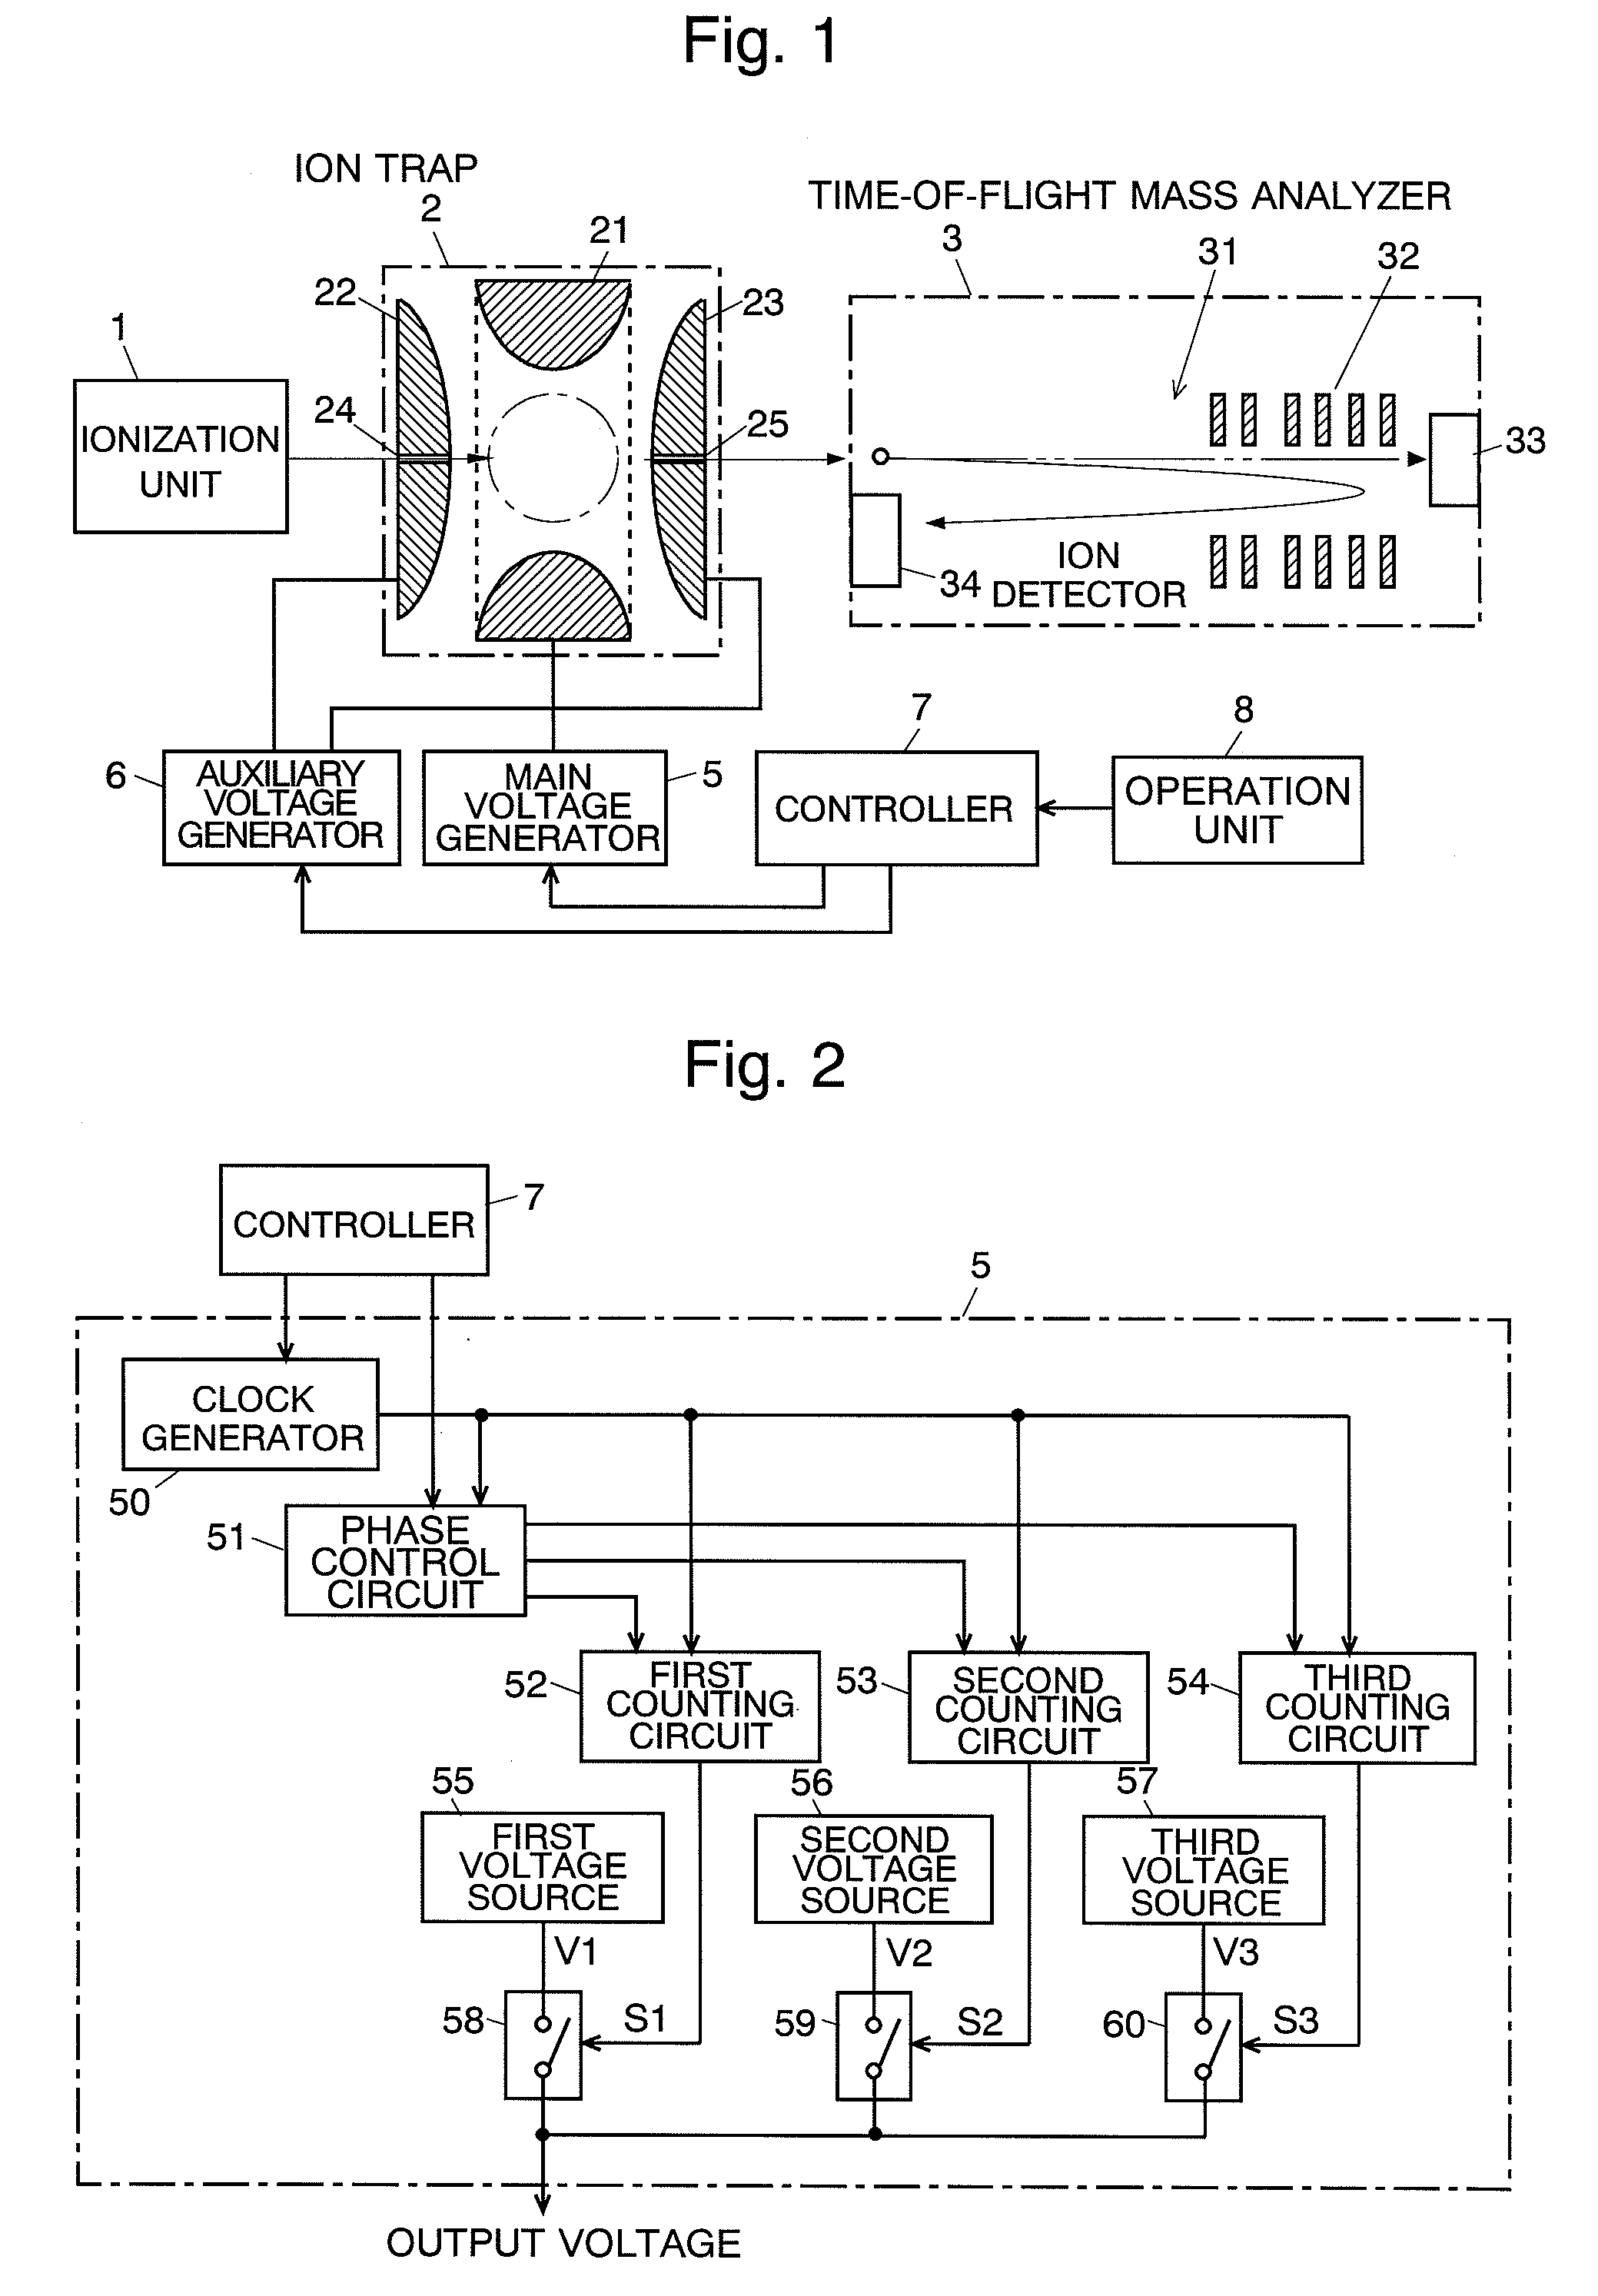 Ion trap time-of-flight mass spectrometer